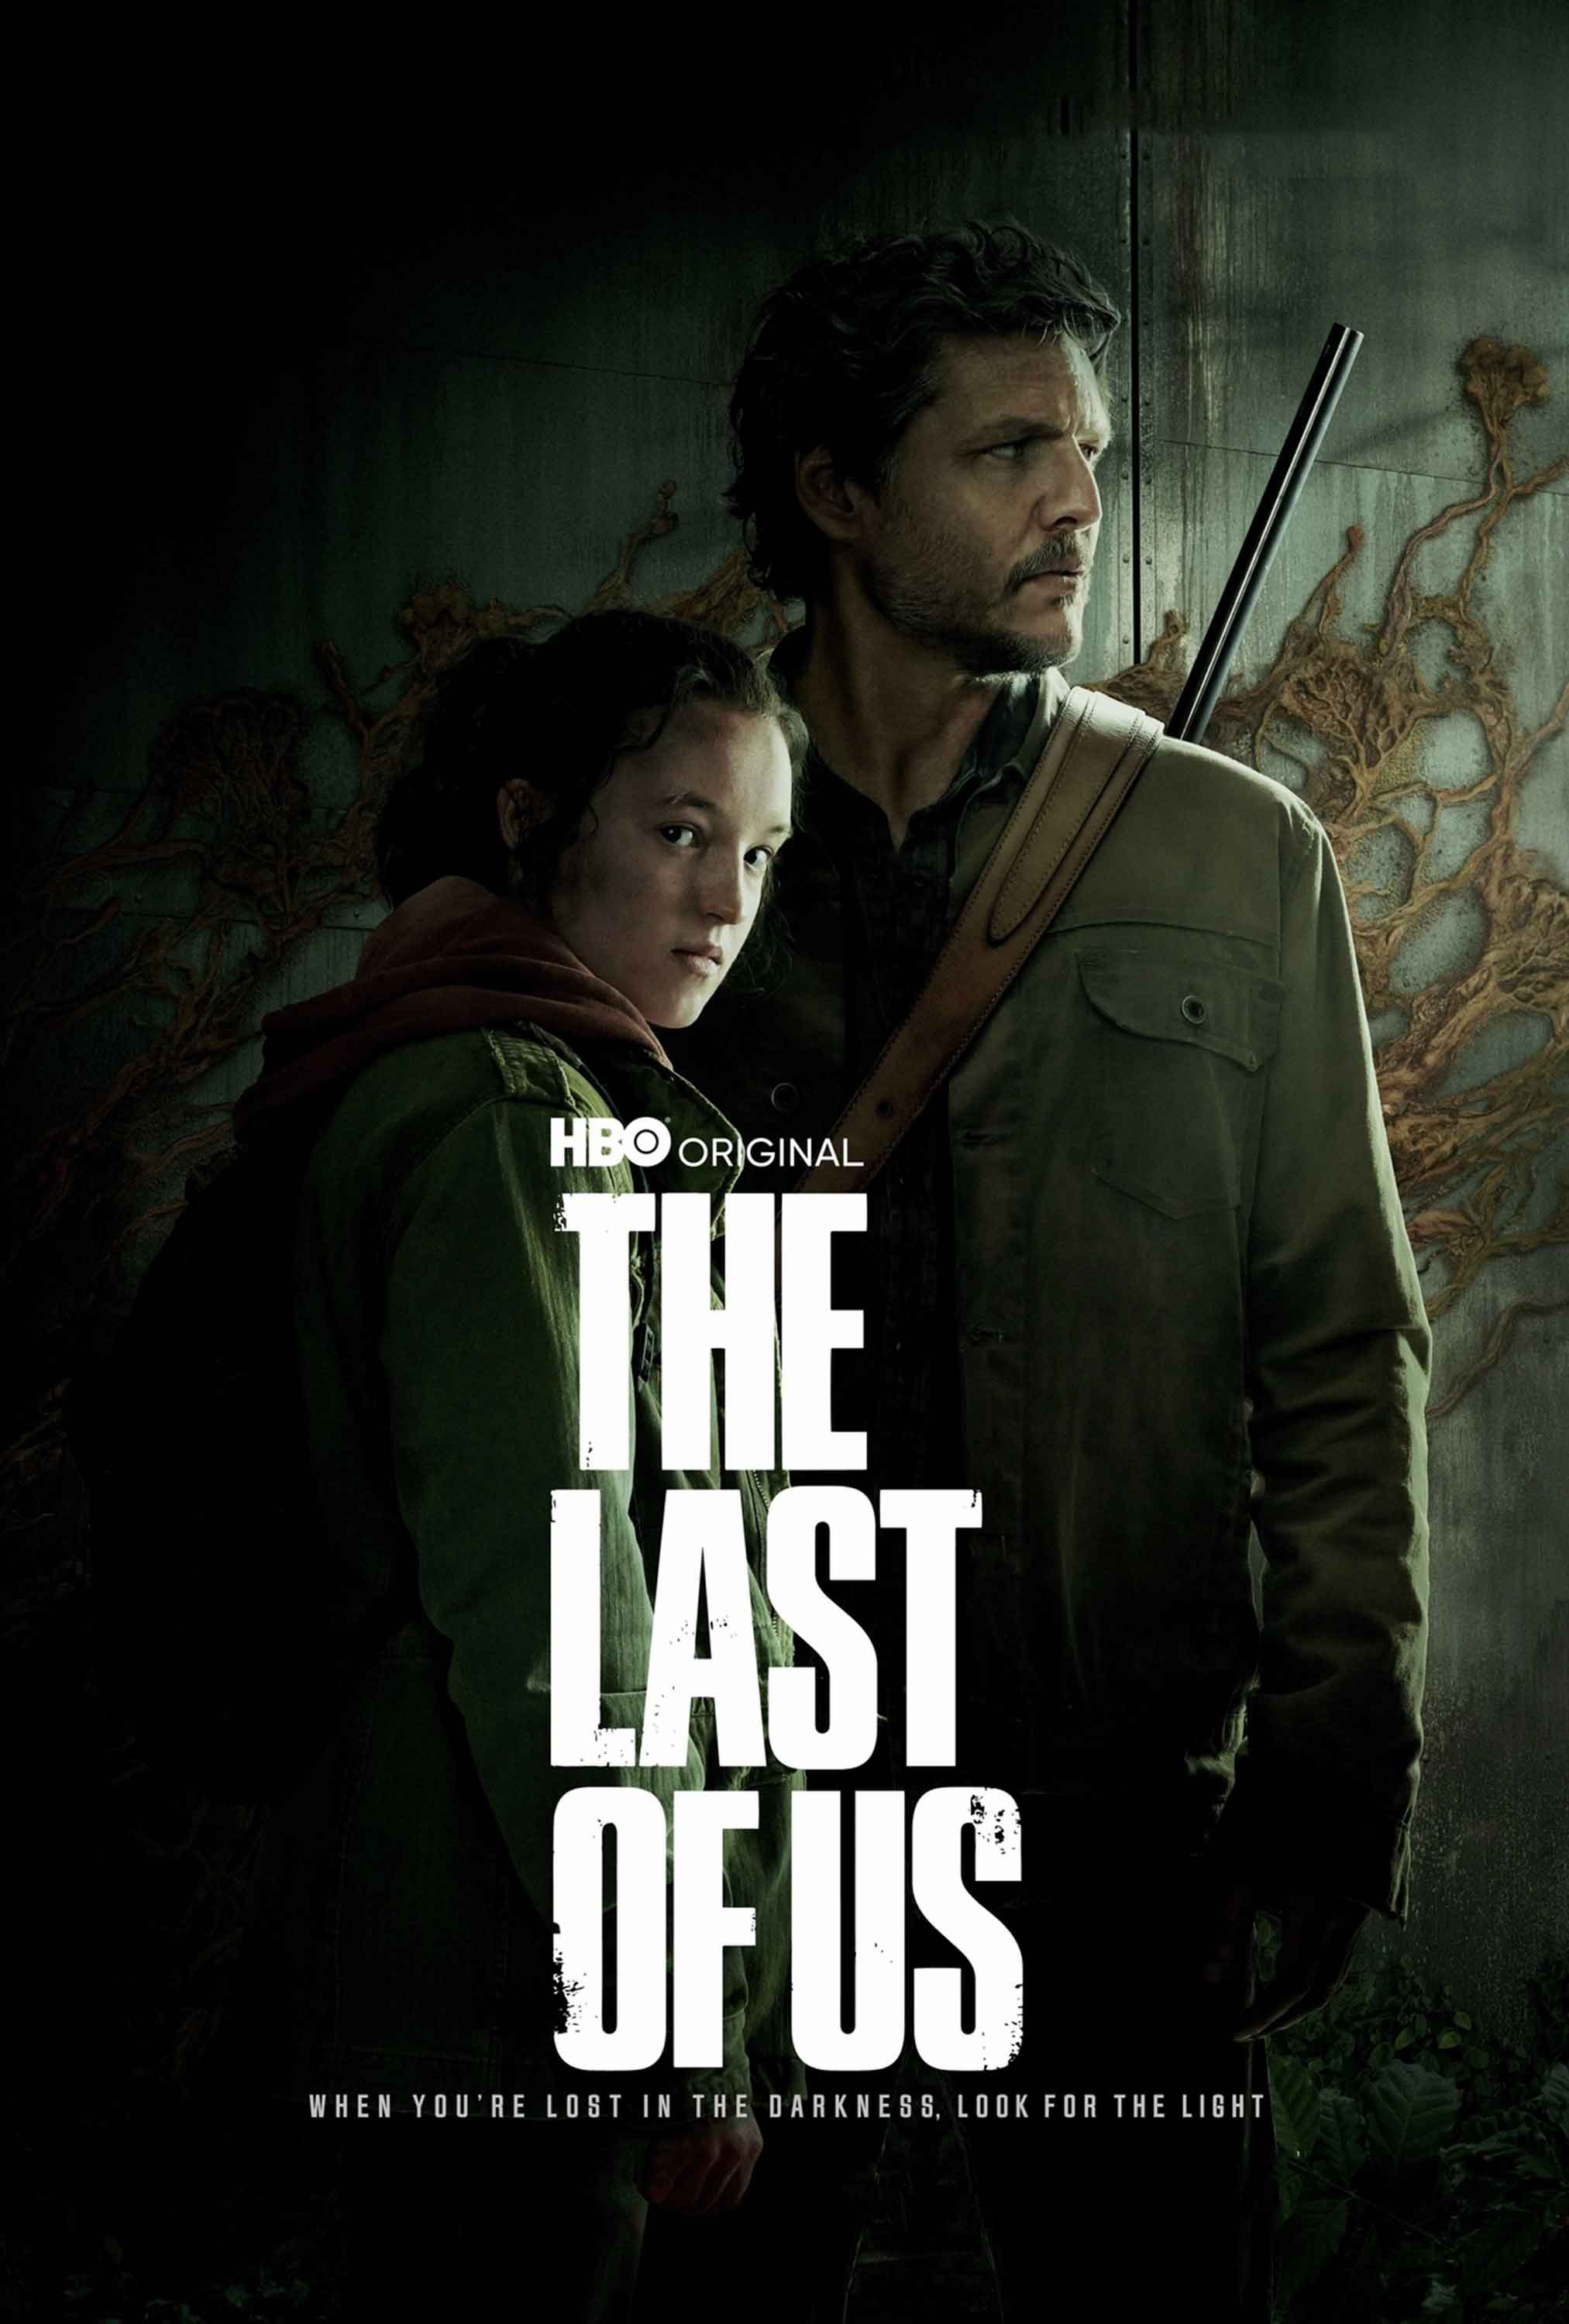 HBO's The Last of Us TV Series Cast - Look for the Light